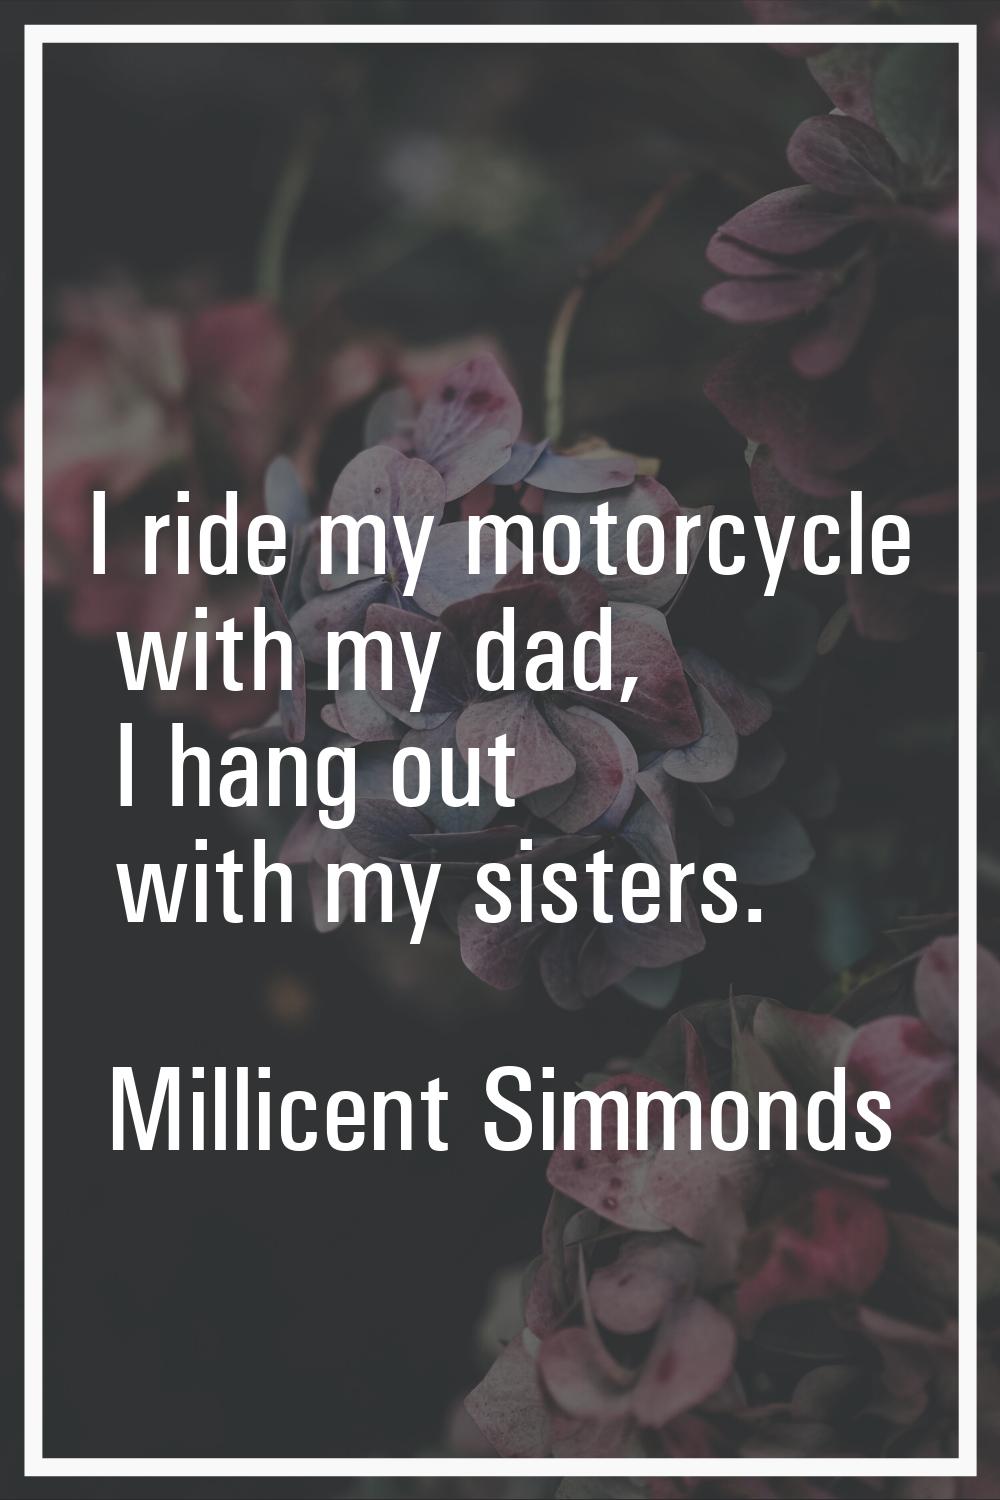 I ride my motorcycle with my dad, I hang out with my sisters.